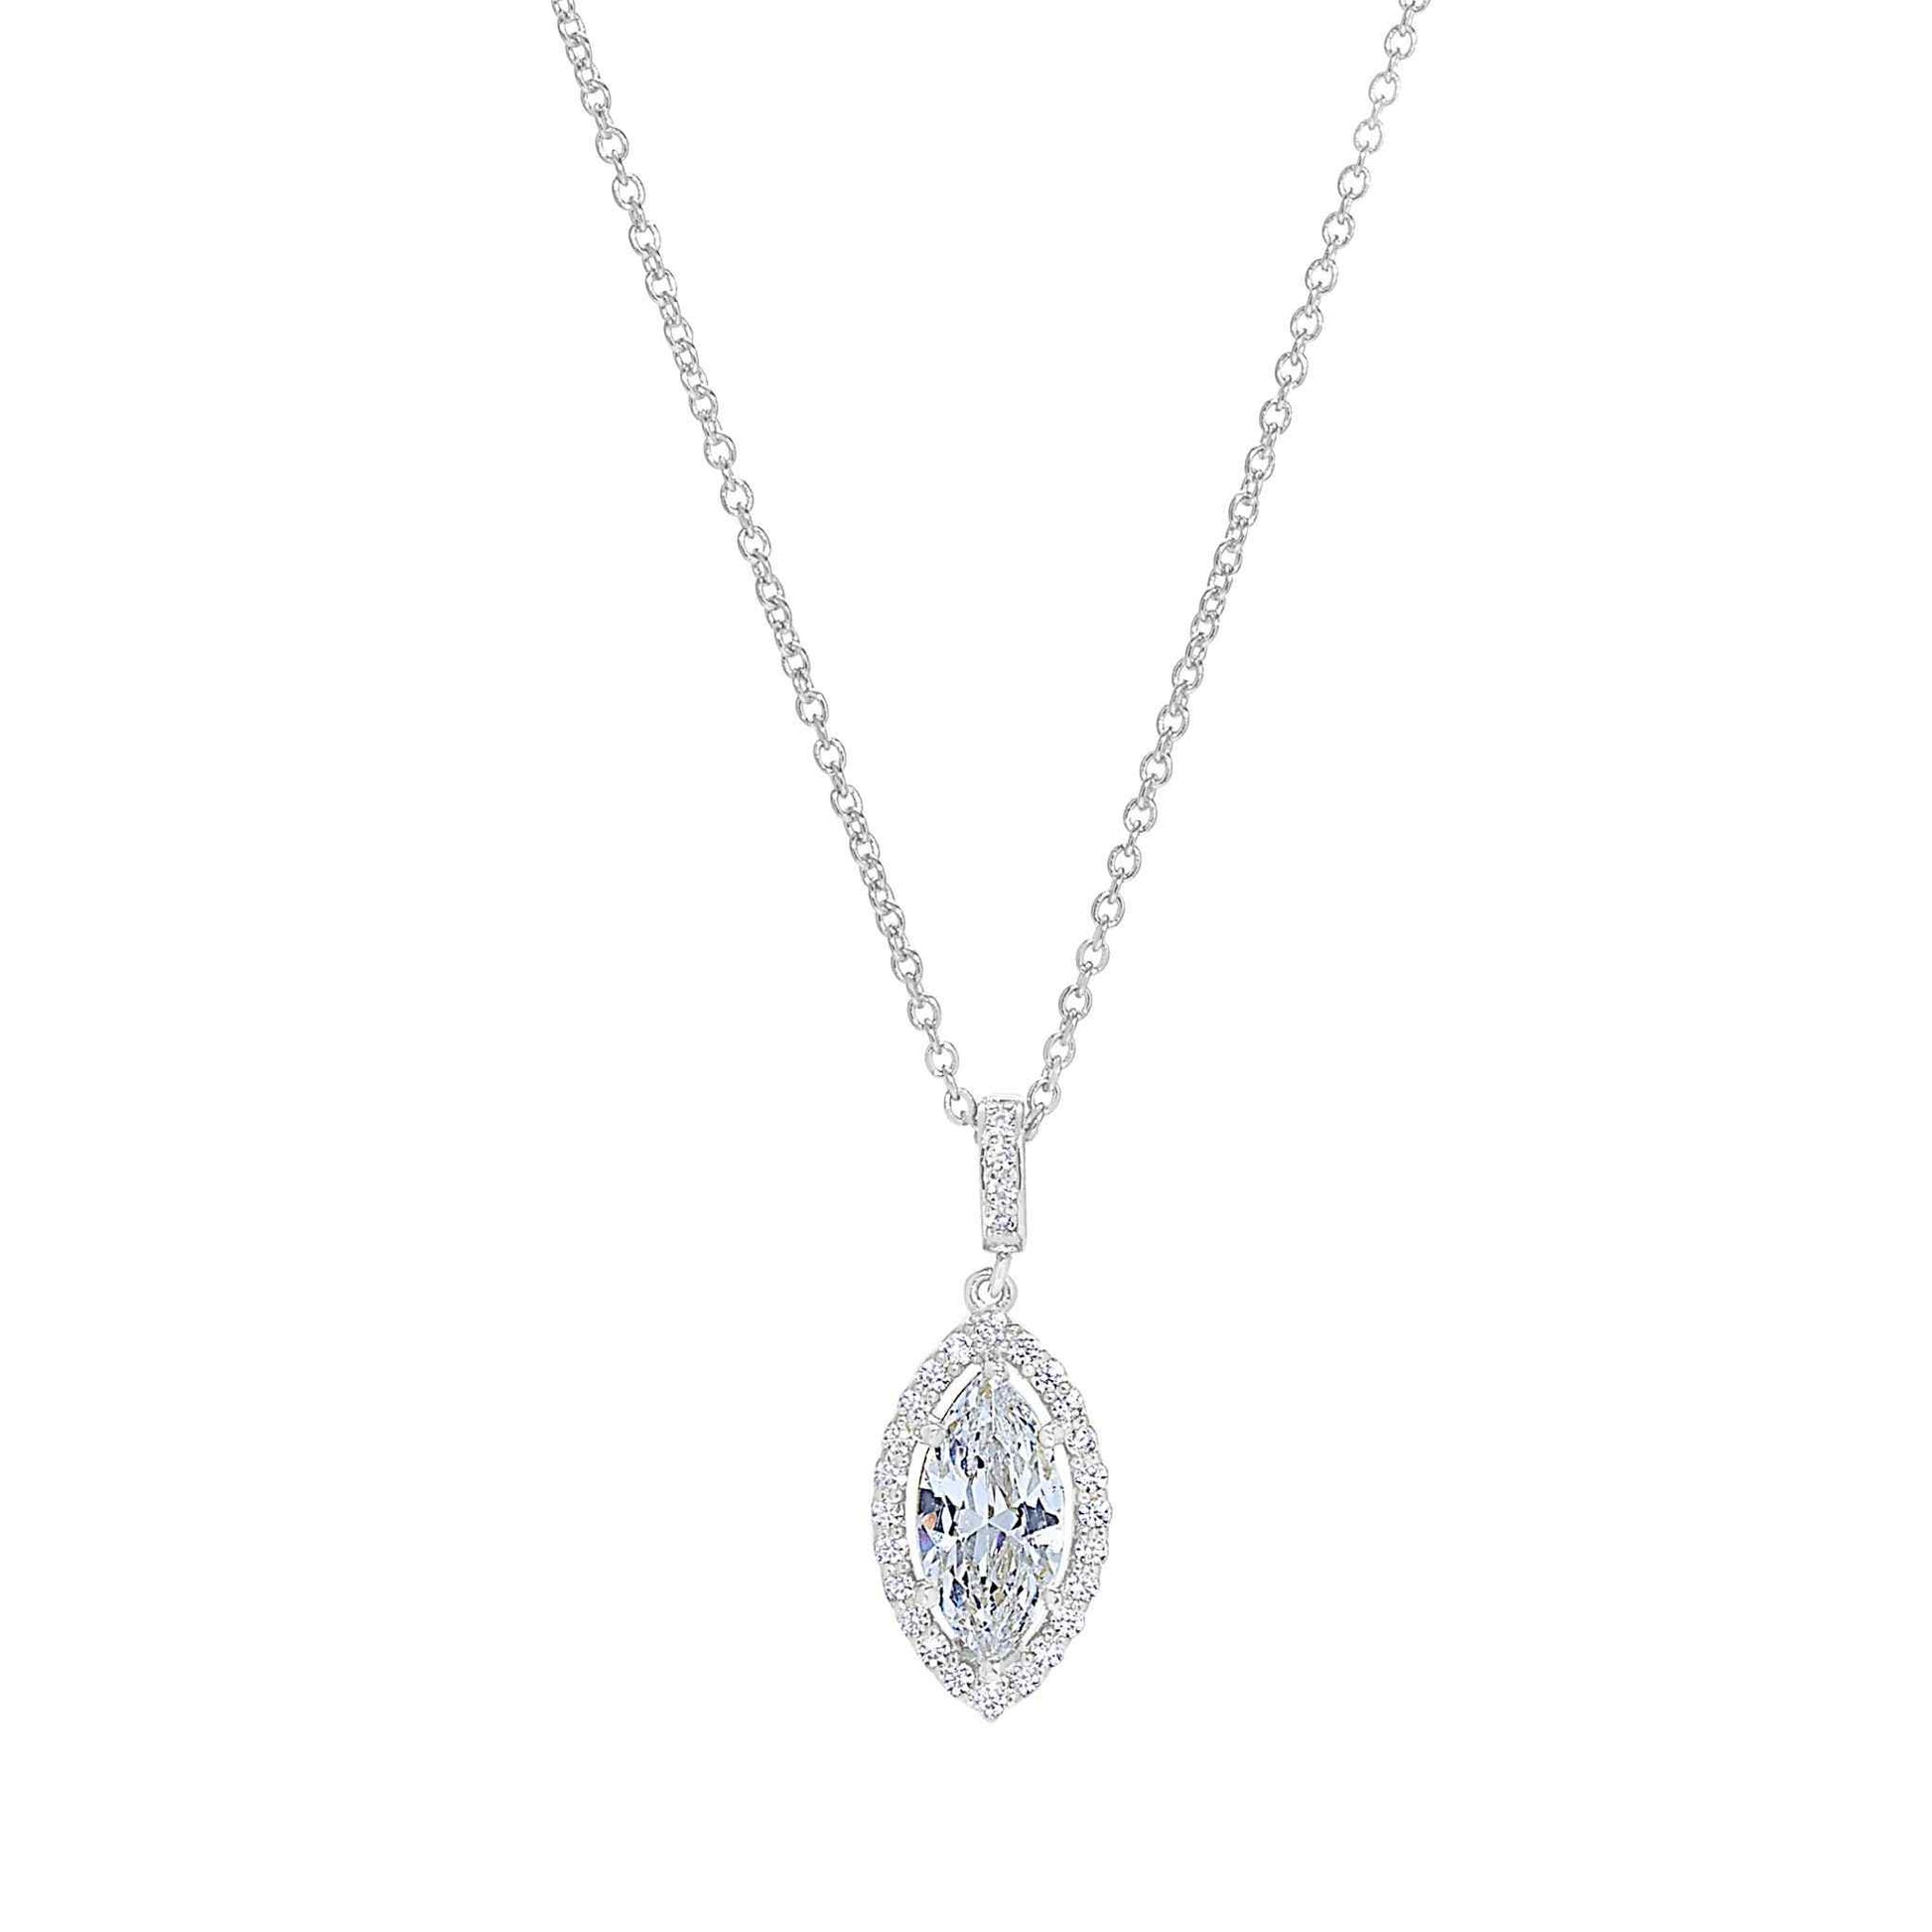 A marquise halo necklace with simulated diamonds displayed on a neutral white background.